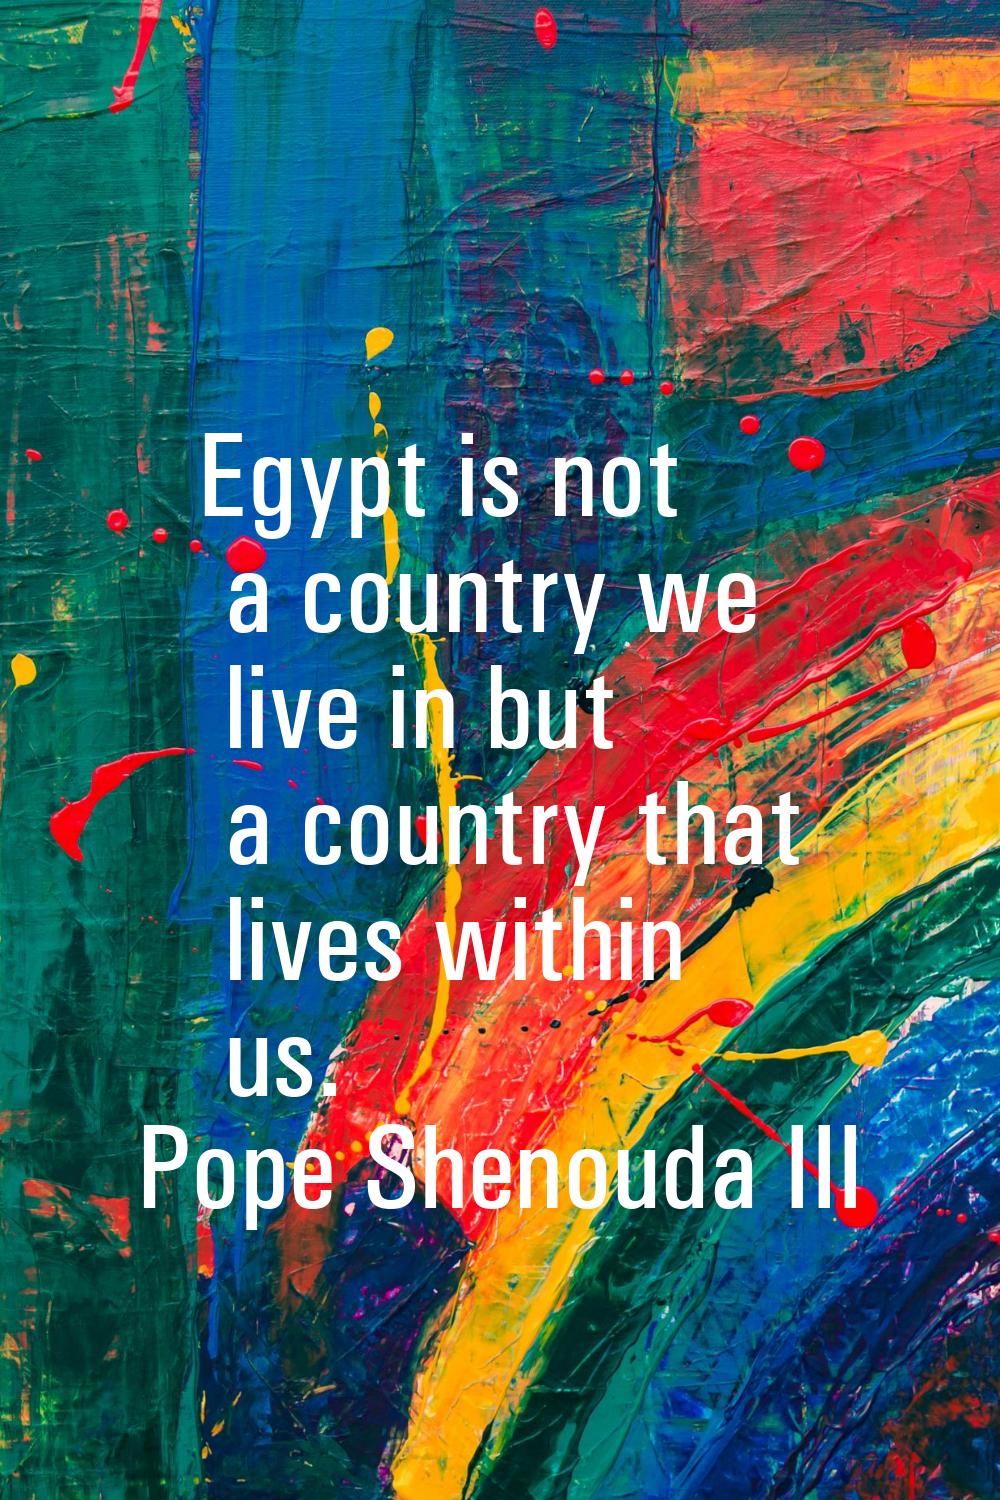 Egypt is not a country we live in but a country that lives within us.